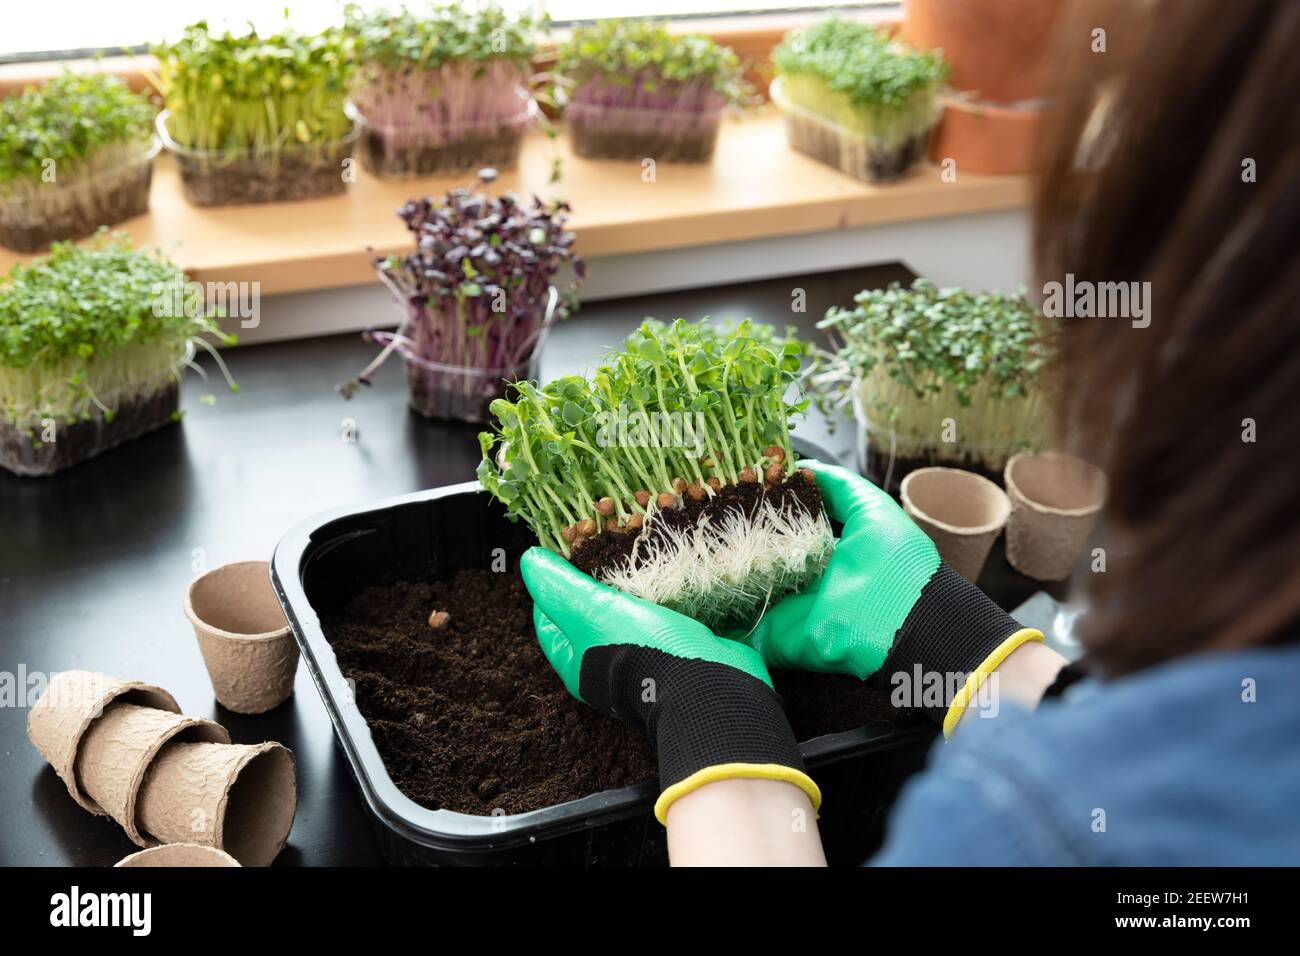 Plant seeds for superfood - women holding in hands peas with green sprouts in front of soil. Hobbies and healthy eating concept. Gardening at home. Stock Photo